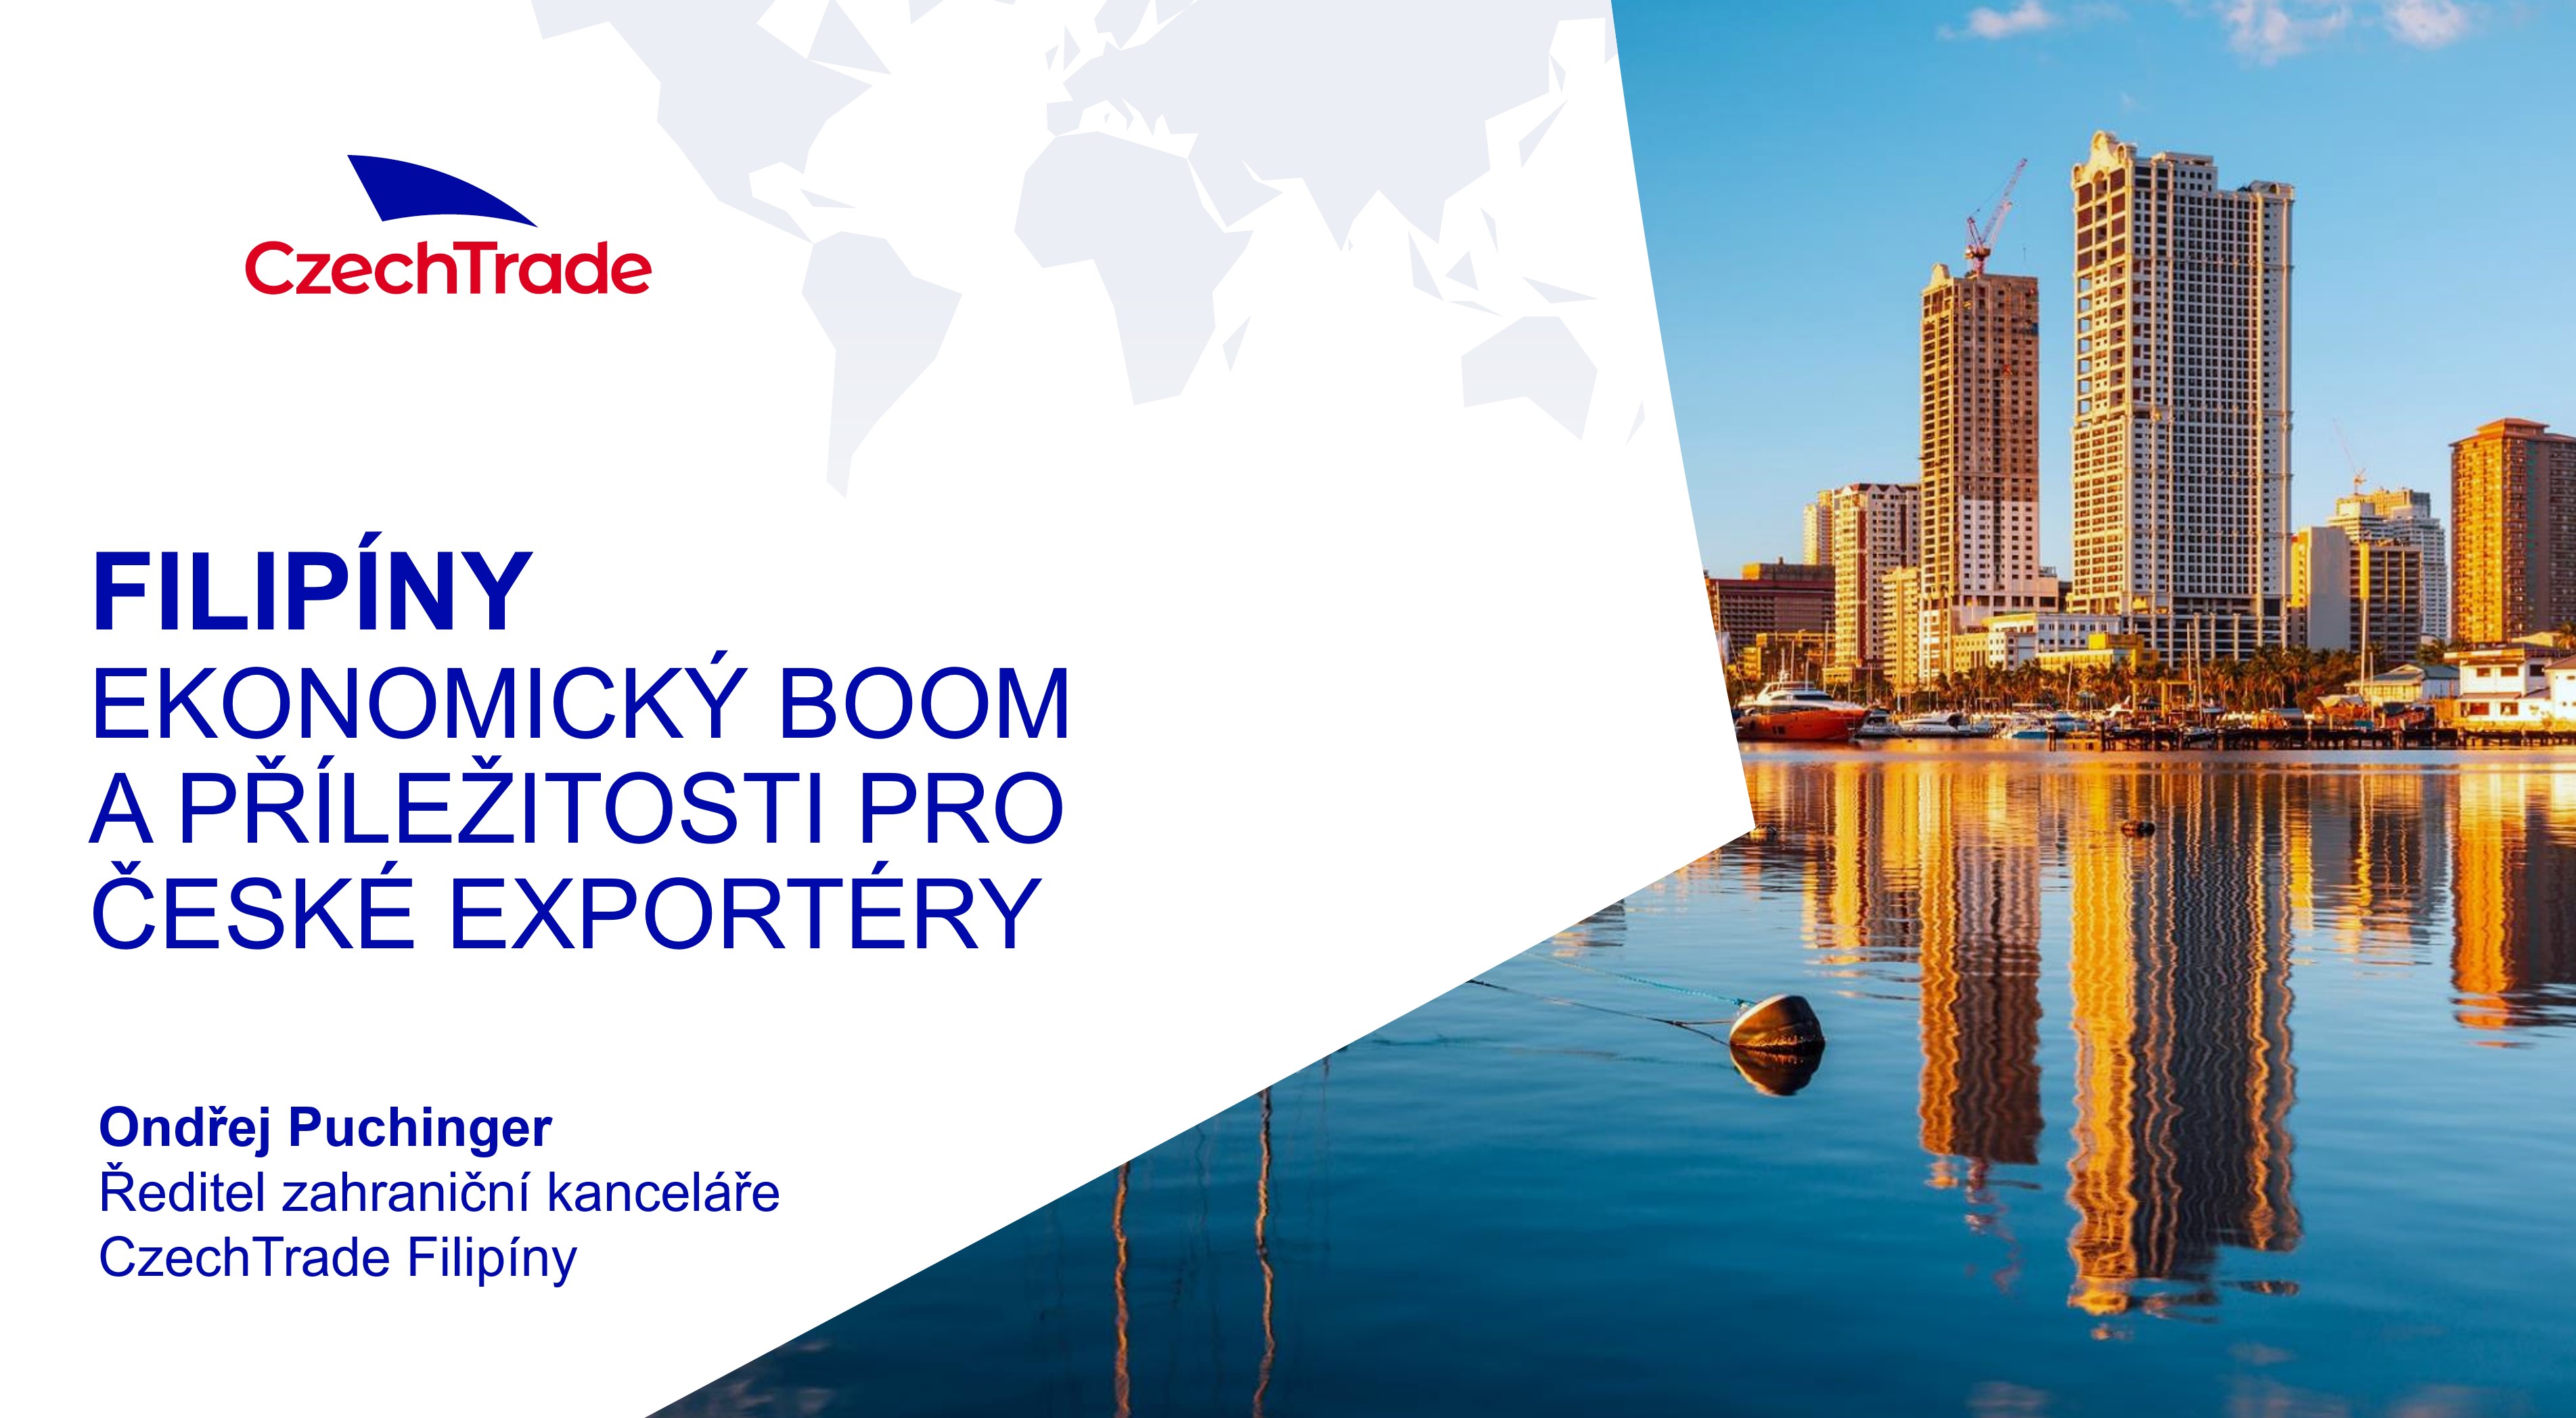 PHILIPPINES - Economic boom and opportunities for Czech exporters